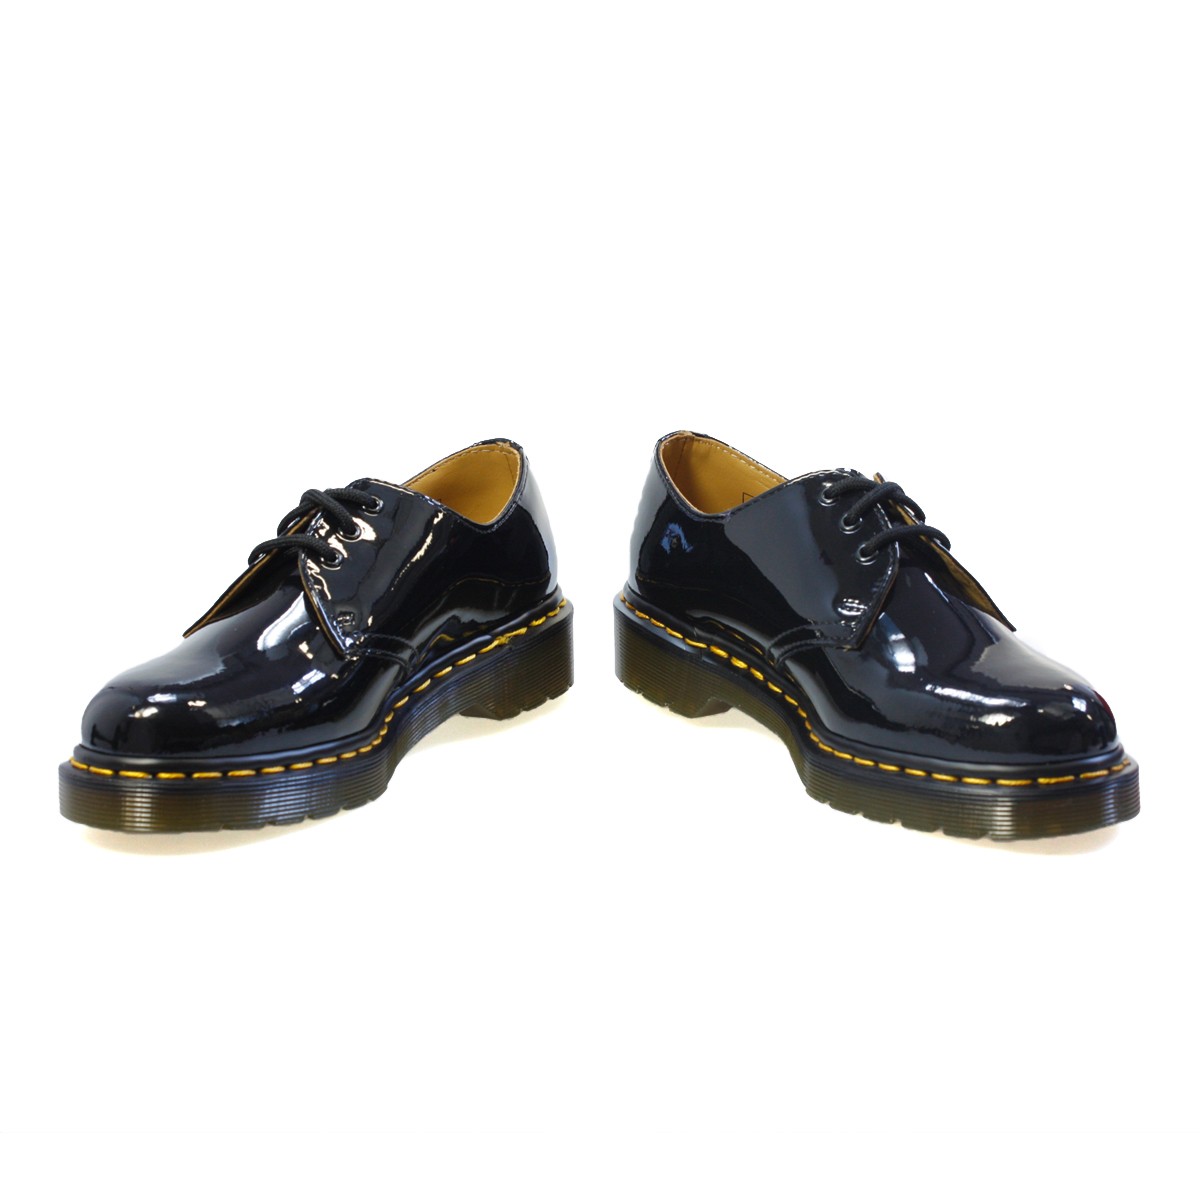 Dr Martens 1461 with blazer and pants | Styleforum